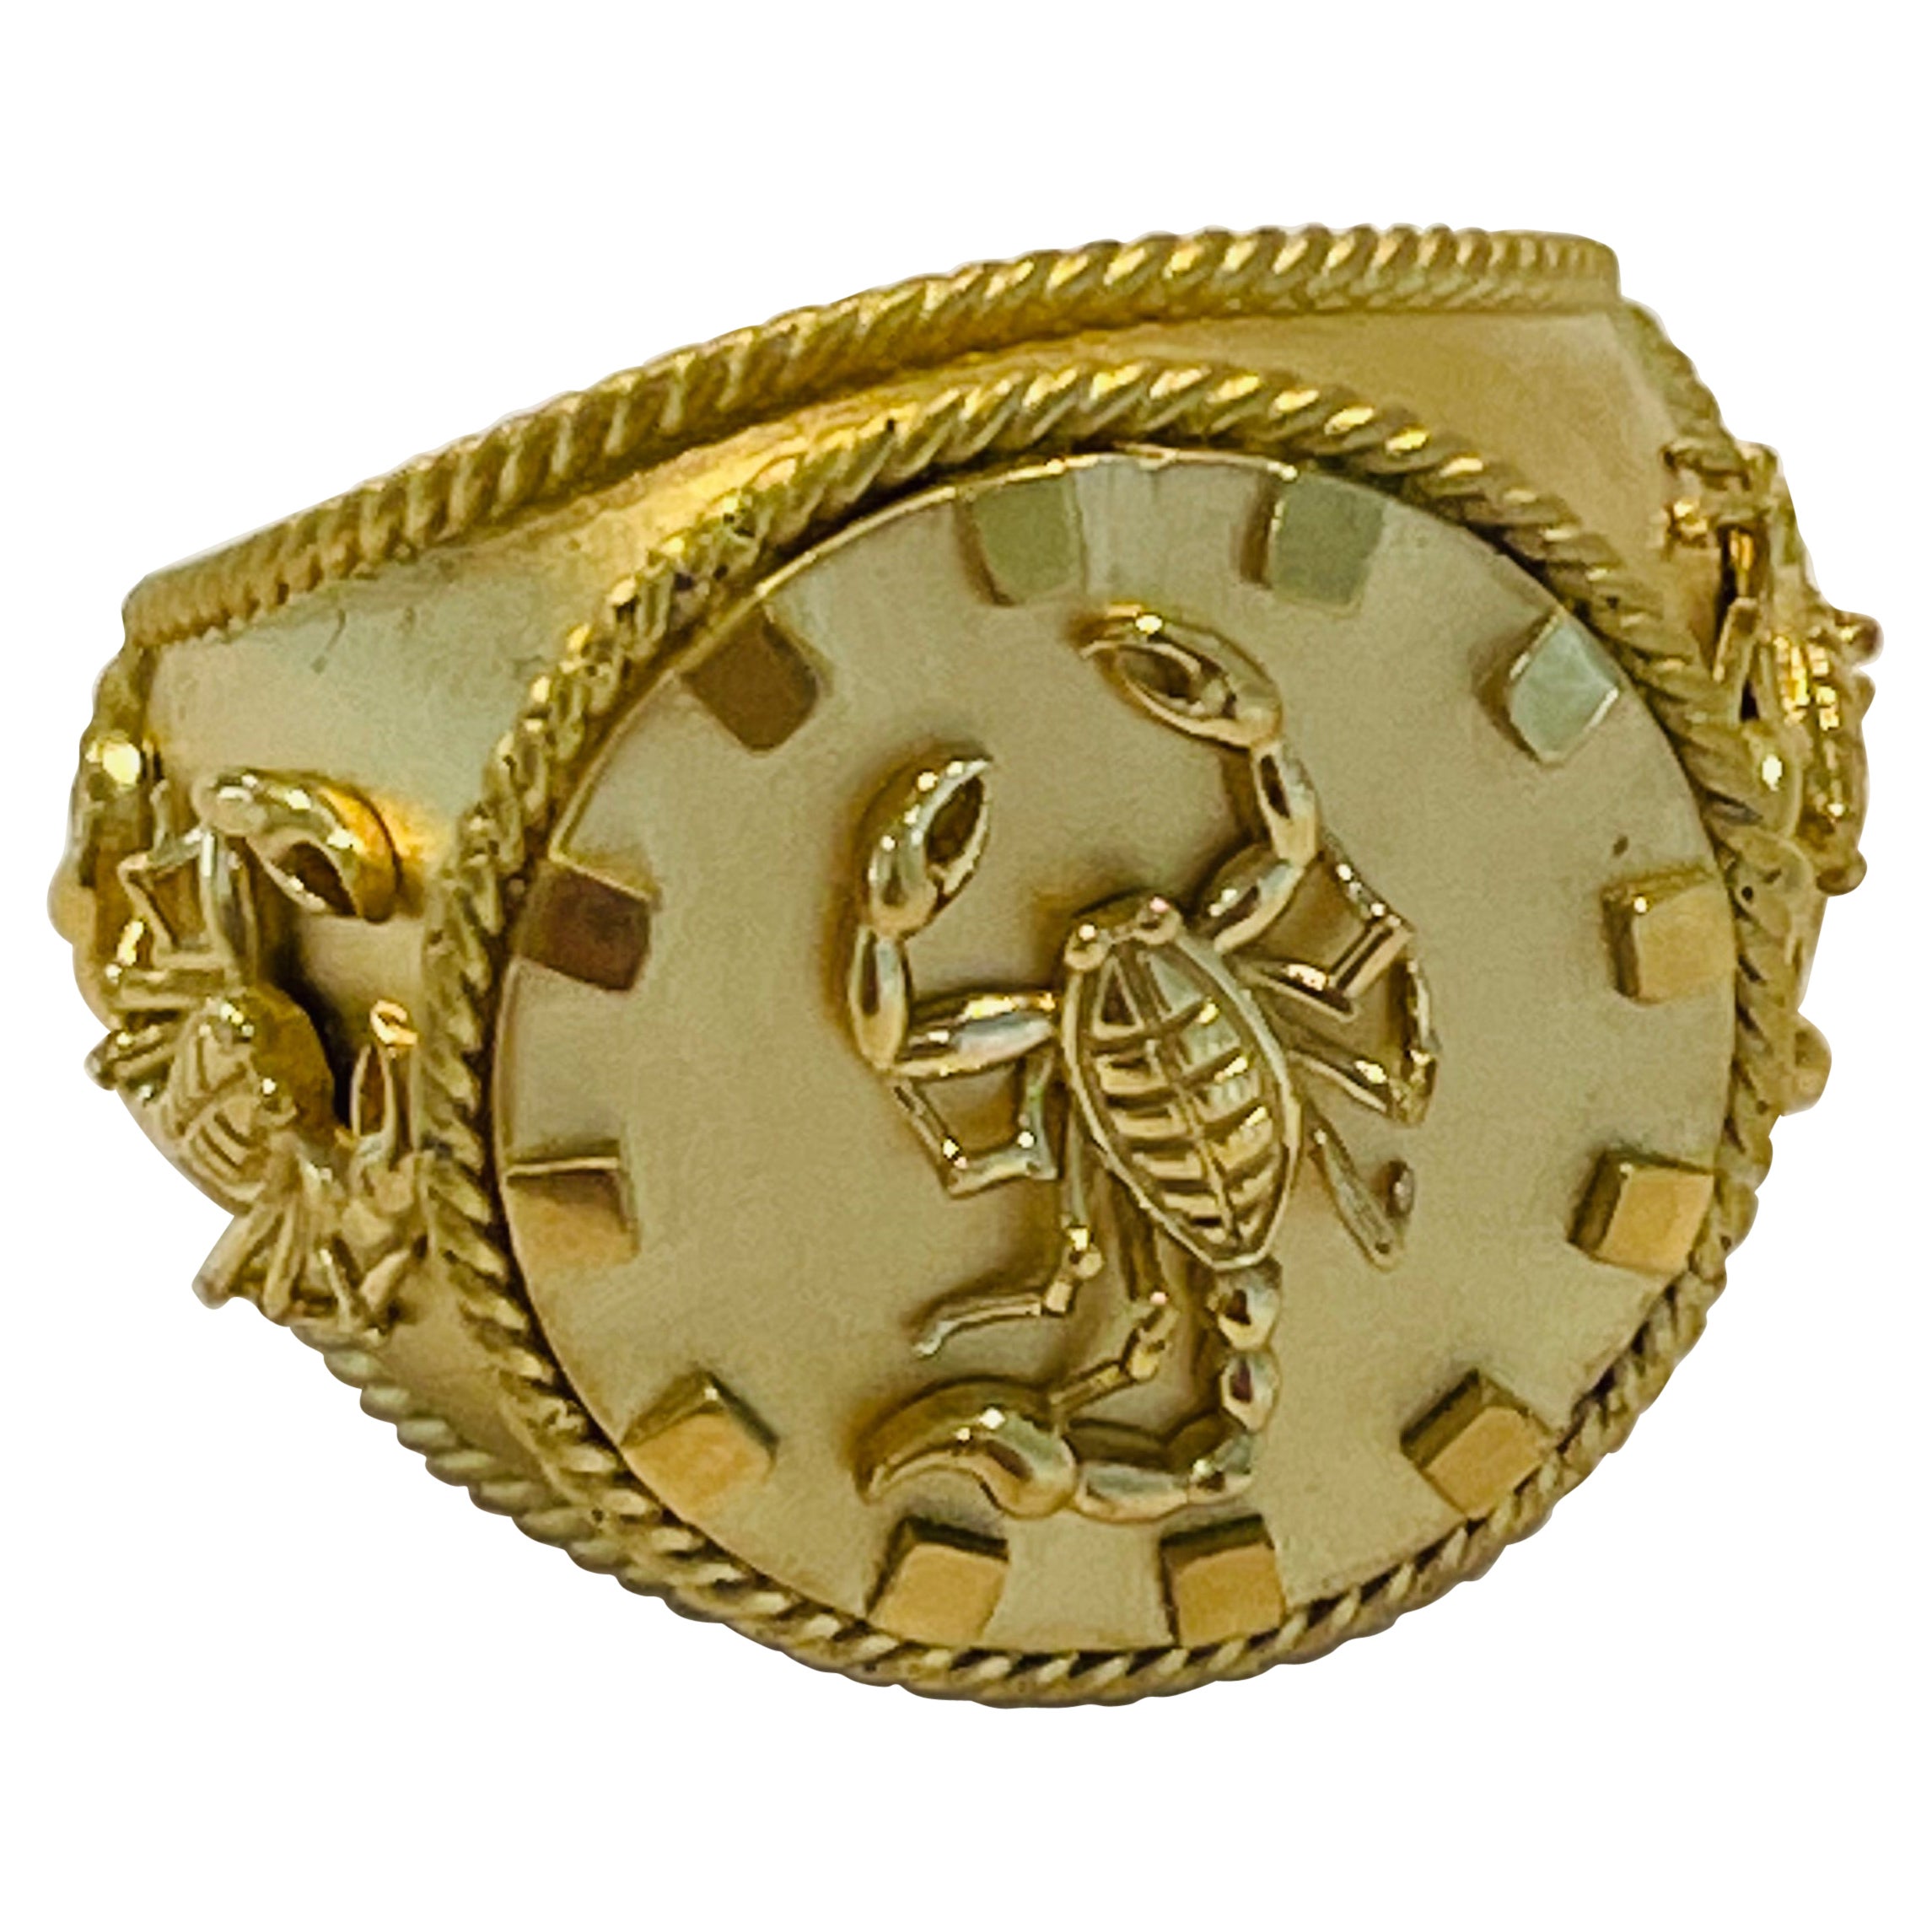 Zodiac Scorpion Ring in 18k Gold by Tagili For Sale